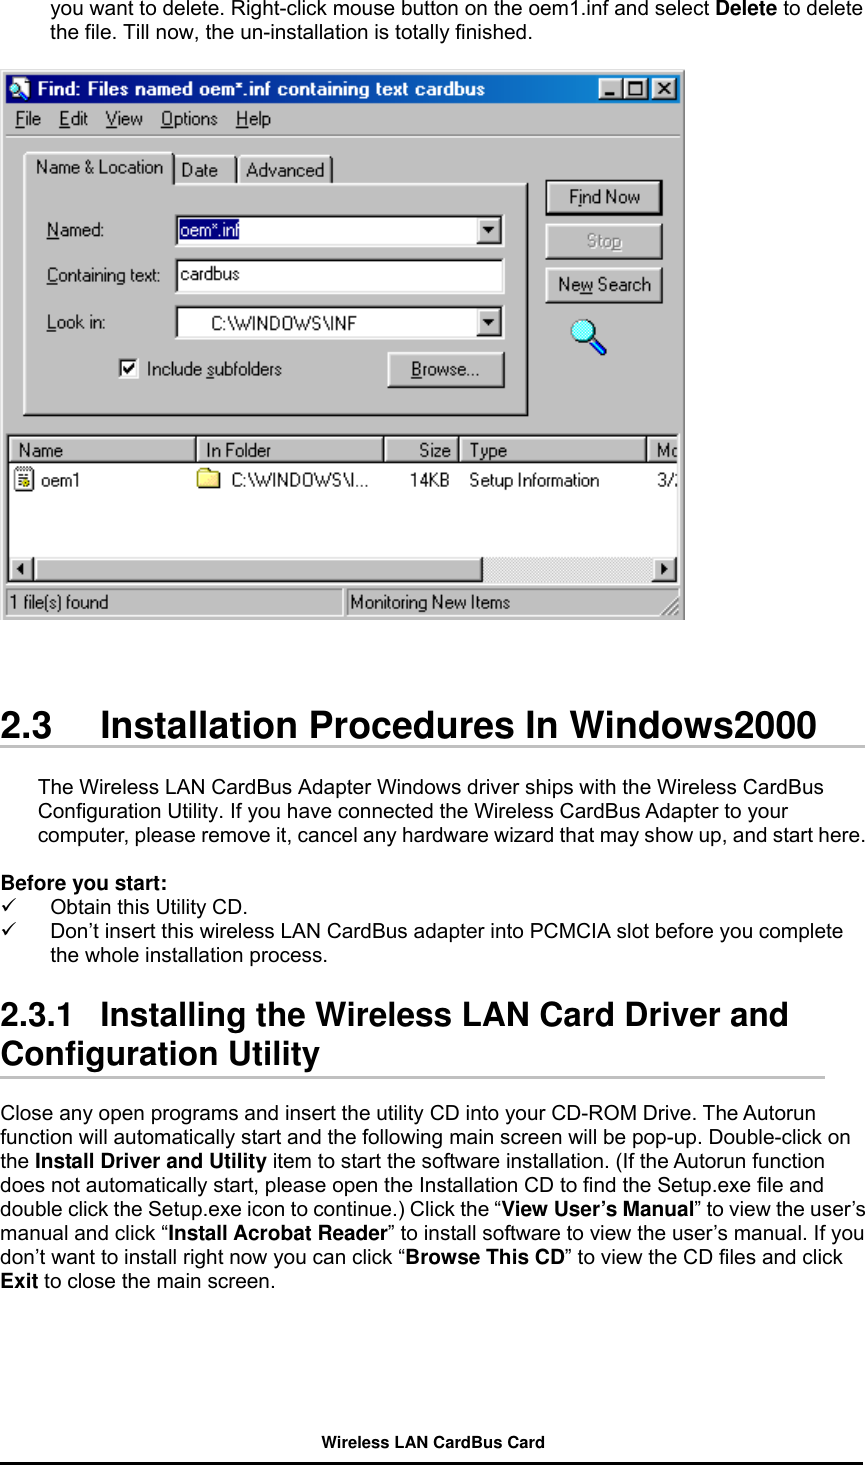 you want to delete. Right-click mouse button on the oem1.inf and select Delete to delete the file. Till now, the un-installation is totally finished.    2.3  Installation Procedures In Windows2000  The Wireless LAN CardBus Adapter Windows driver ships with the Wireless CardBus Configuration Utility. If you have connected the Wireless CardBus Adapter to your computer, please remove it, cancel any hardware wizard that may show up, and start here.  Before you start:   Obtain this Utility CD.   Don’t insert this wireless LAN CardBus adapter into PCMCIA slot before you complete the whole installation process.    2.3.1   Installing the Wireless LAN Card Driver and Configuration Utility  Close any open programs and insert the utility CD into your CD-ROM Drive. The Autorun function will automatically start and the following main screen will be pop-up. Double-click on the Install Driver and Utility item to start the software installation. (If the Autorun function does not automatically start, please open the Installation CD to find the Setup.exe file and double click the Setup.exe icon to continue.) Click the “View User’s Manual” to view the user’s manual and click “Install Acrobat Reader” to install software to view the user’s manual. If you don’t want to install right now you can click “Browse This CD” to view the CD files and click Exit to close the main screen.  Wireless LAN CardBus Card 